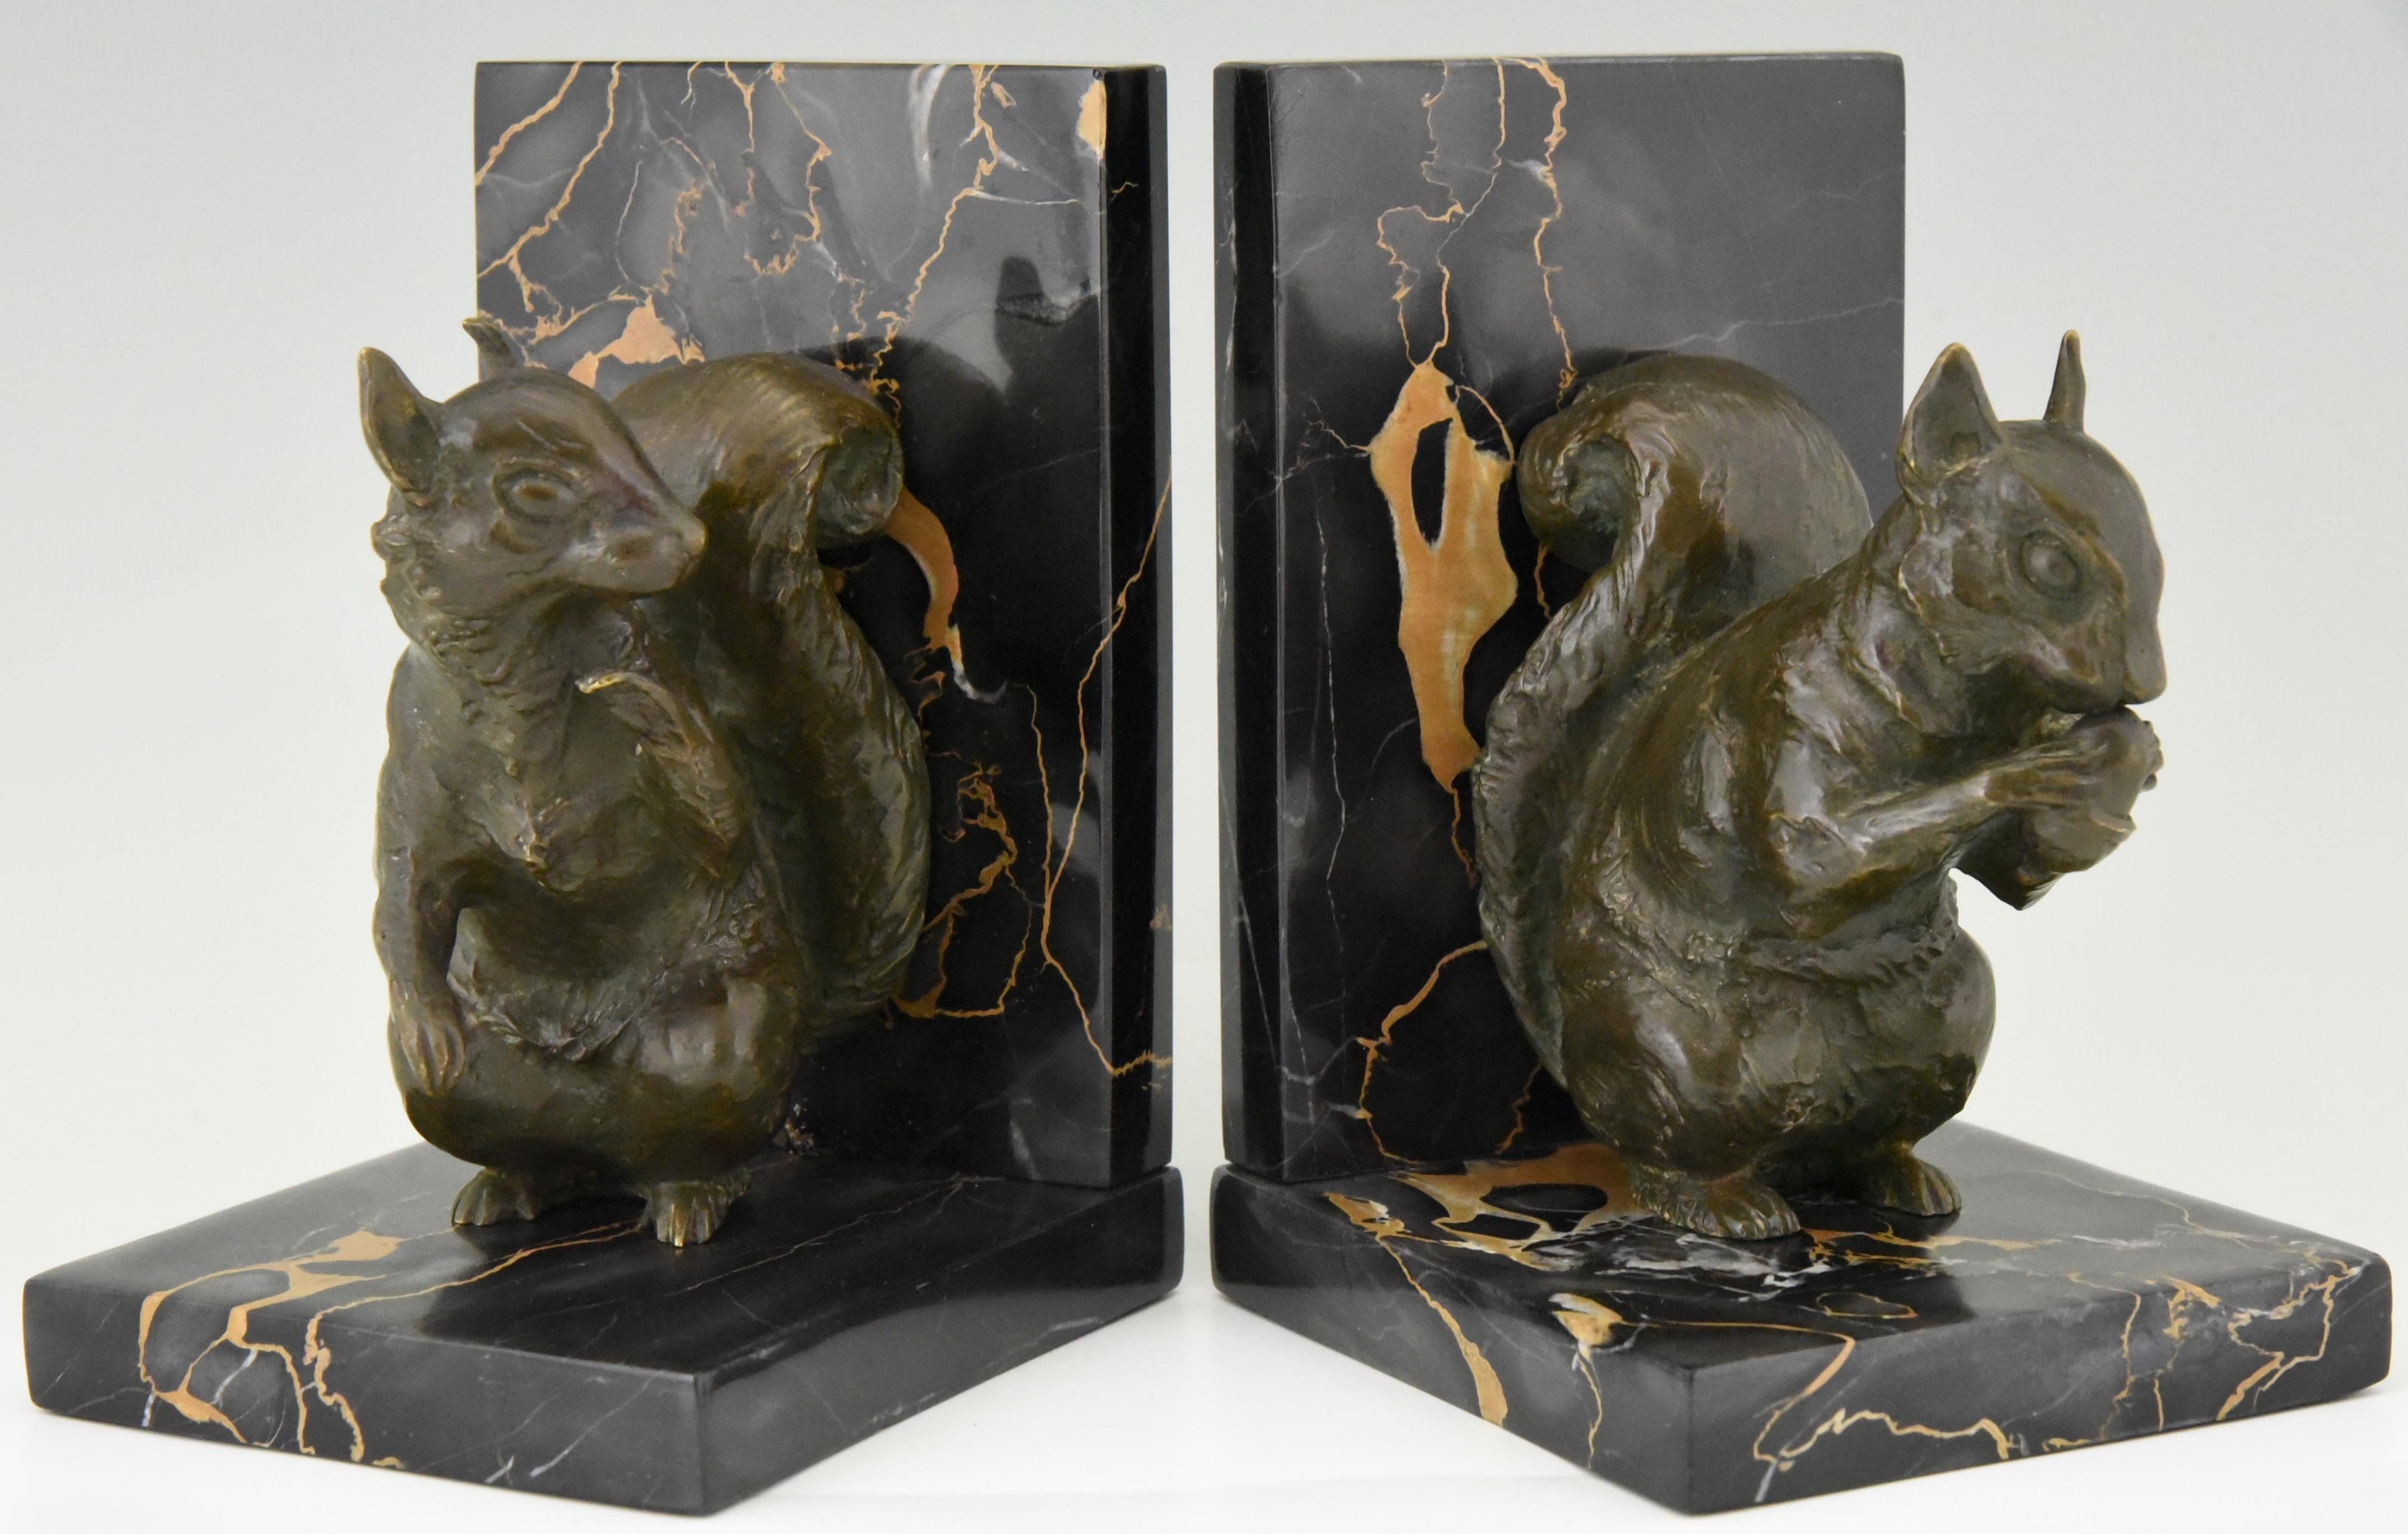 Pair of Art Deco bronze bookends modelled as two squirrels by the French artist René Papa. The bronzes have a lovely green patina and are mounted on fine Portor marble bases, circa 1930.

      